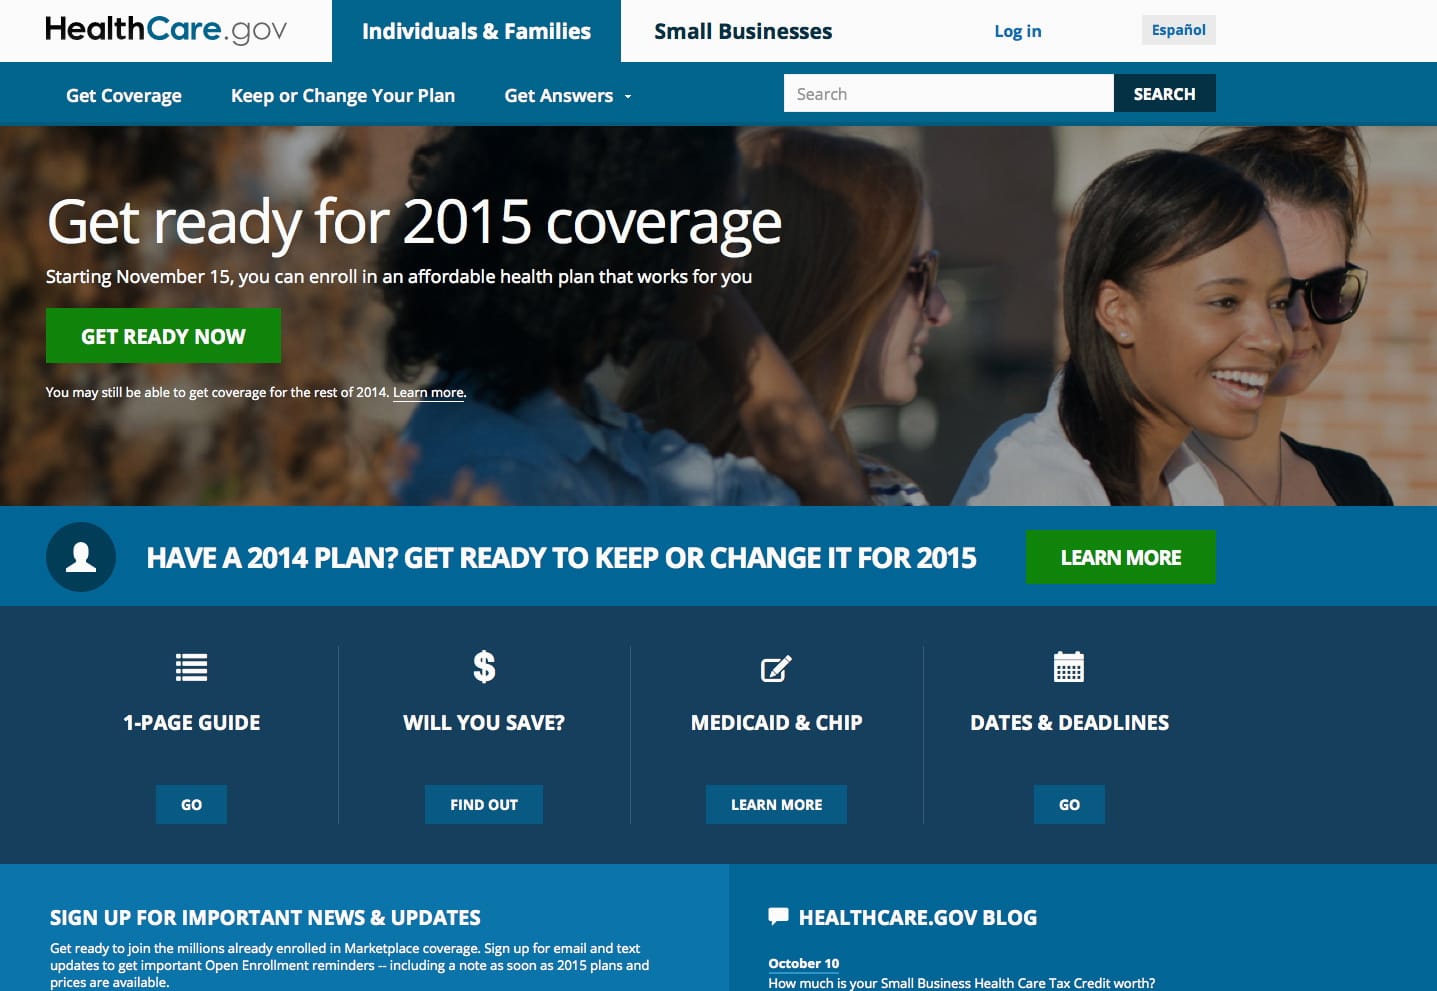 A screen shot shows the home page of HealthCare,gov, a federal government website managed by the U.S.